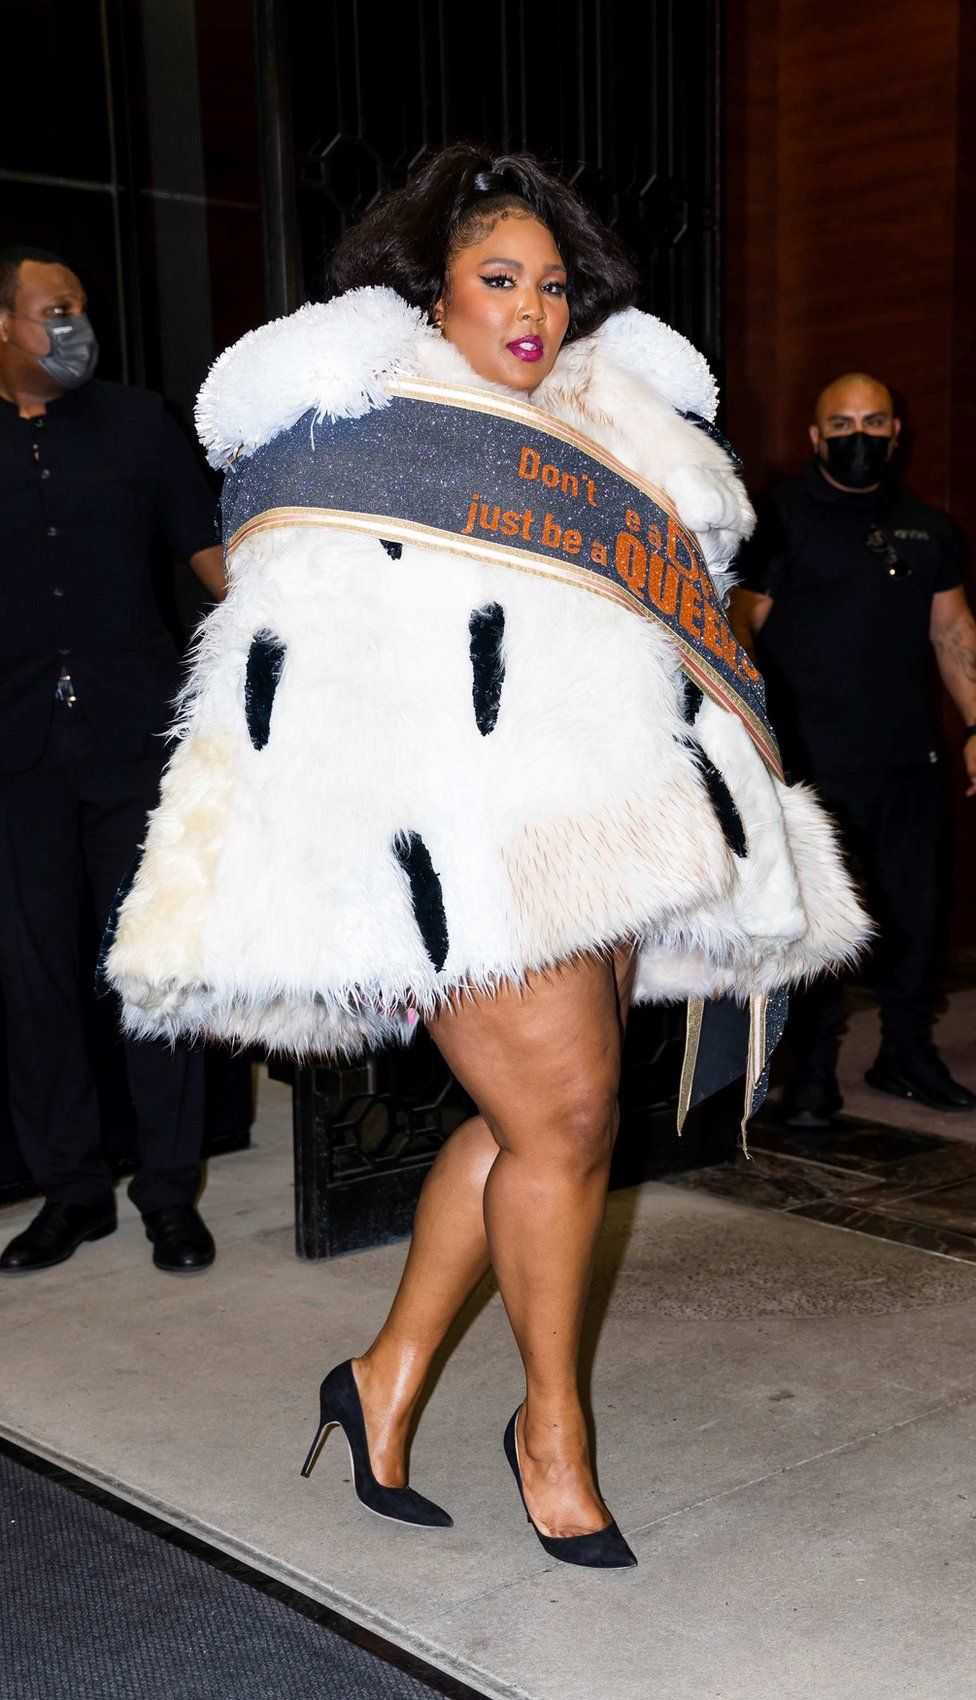 Lizzo wearing a faux ermine dress with a sash which is embroidered with the words: 'Don't be a drag, be a queen' by Viktor & Rolf (New York, 2021).